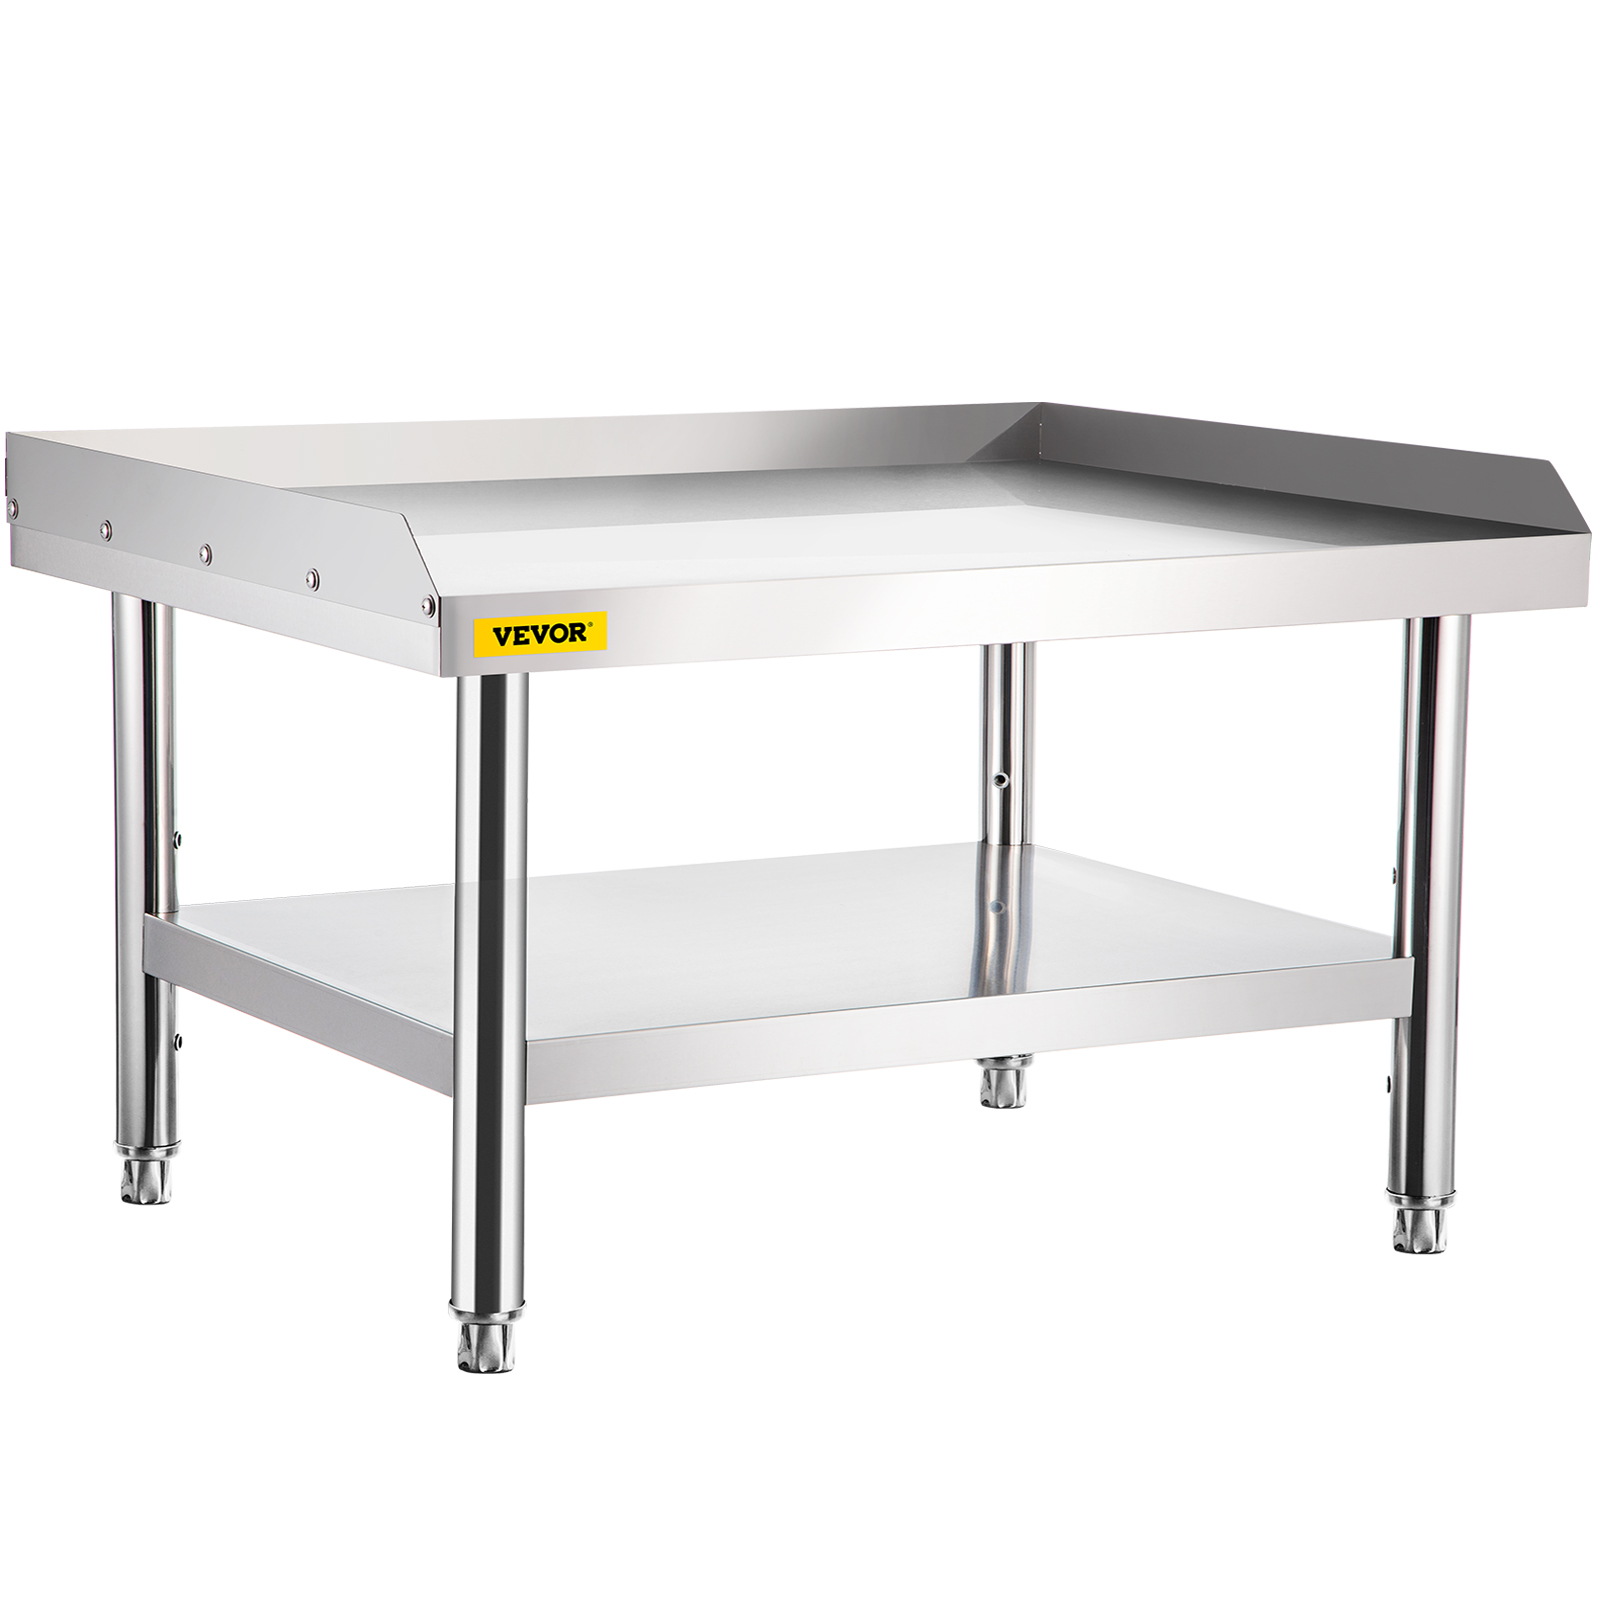 Shimmy Stainless Steel Work & Prep Table 24 x 36 Inches Table for Commercial Kitchen and Restaurant